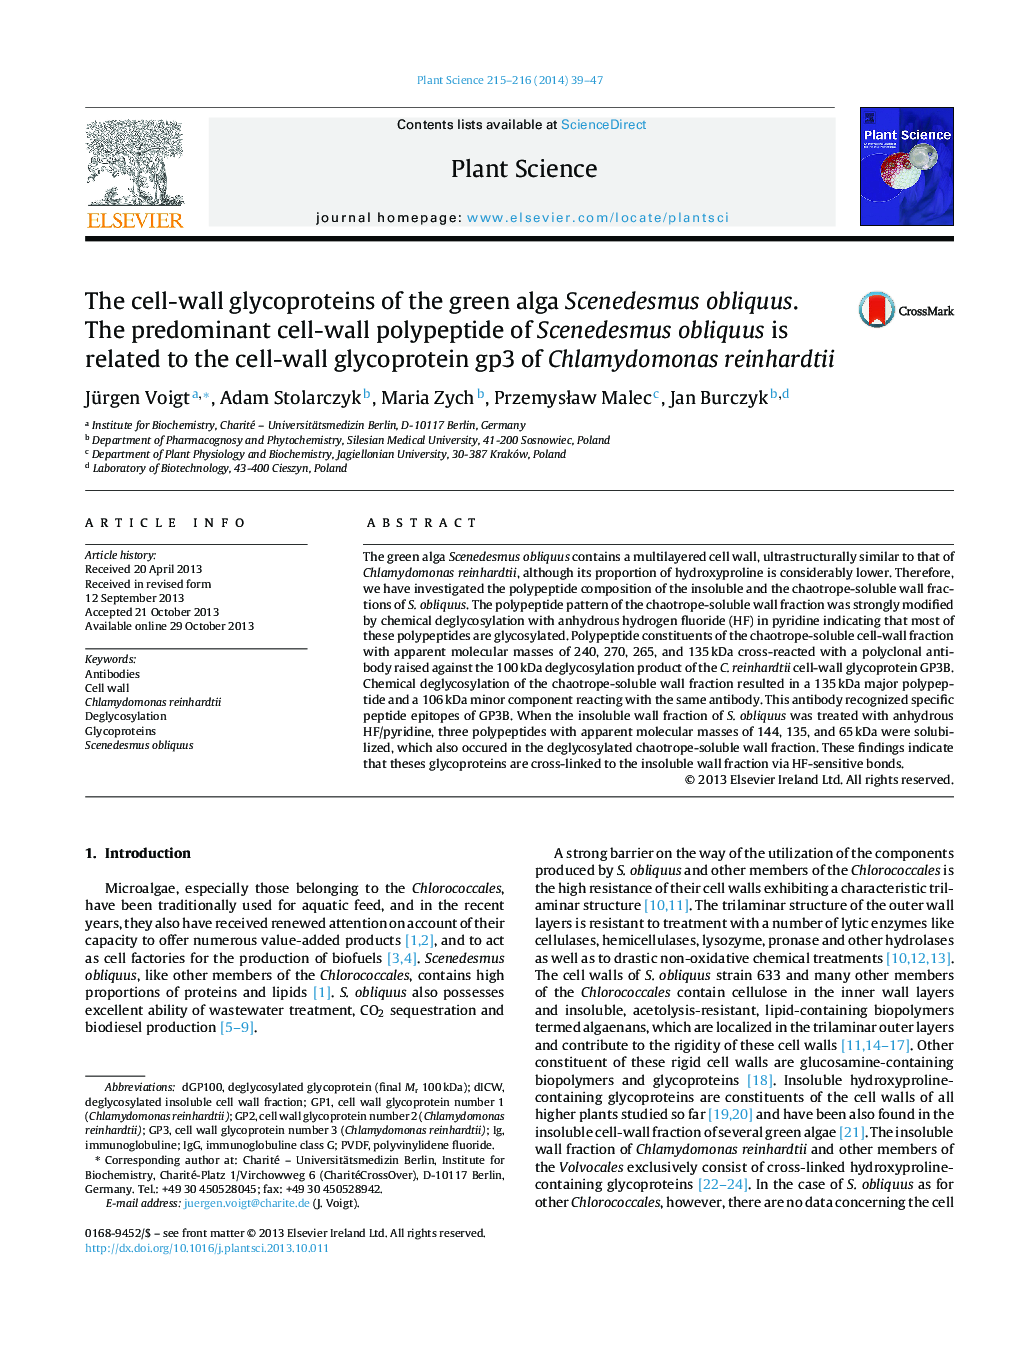 The cell-wall glycoproteins of the green alga Scenedesmus obliquus. The predominant cell-wall polypeptide of Scenedesmus obliquus is related to the cell-wall glycoprotein gp3 of Chlamydomonas reinhardtii